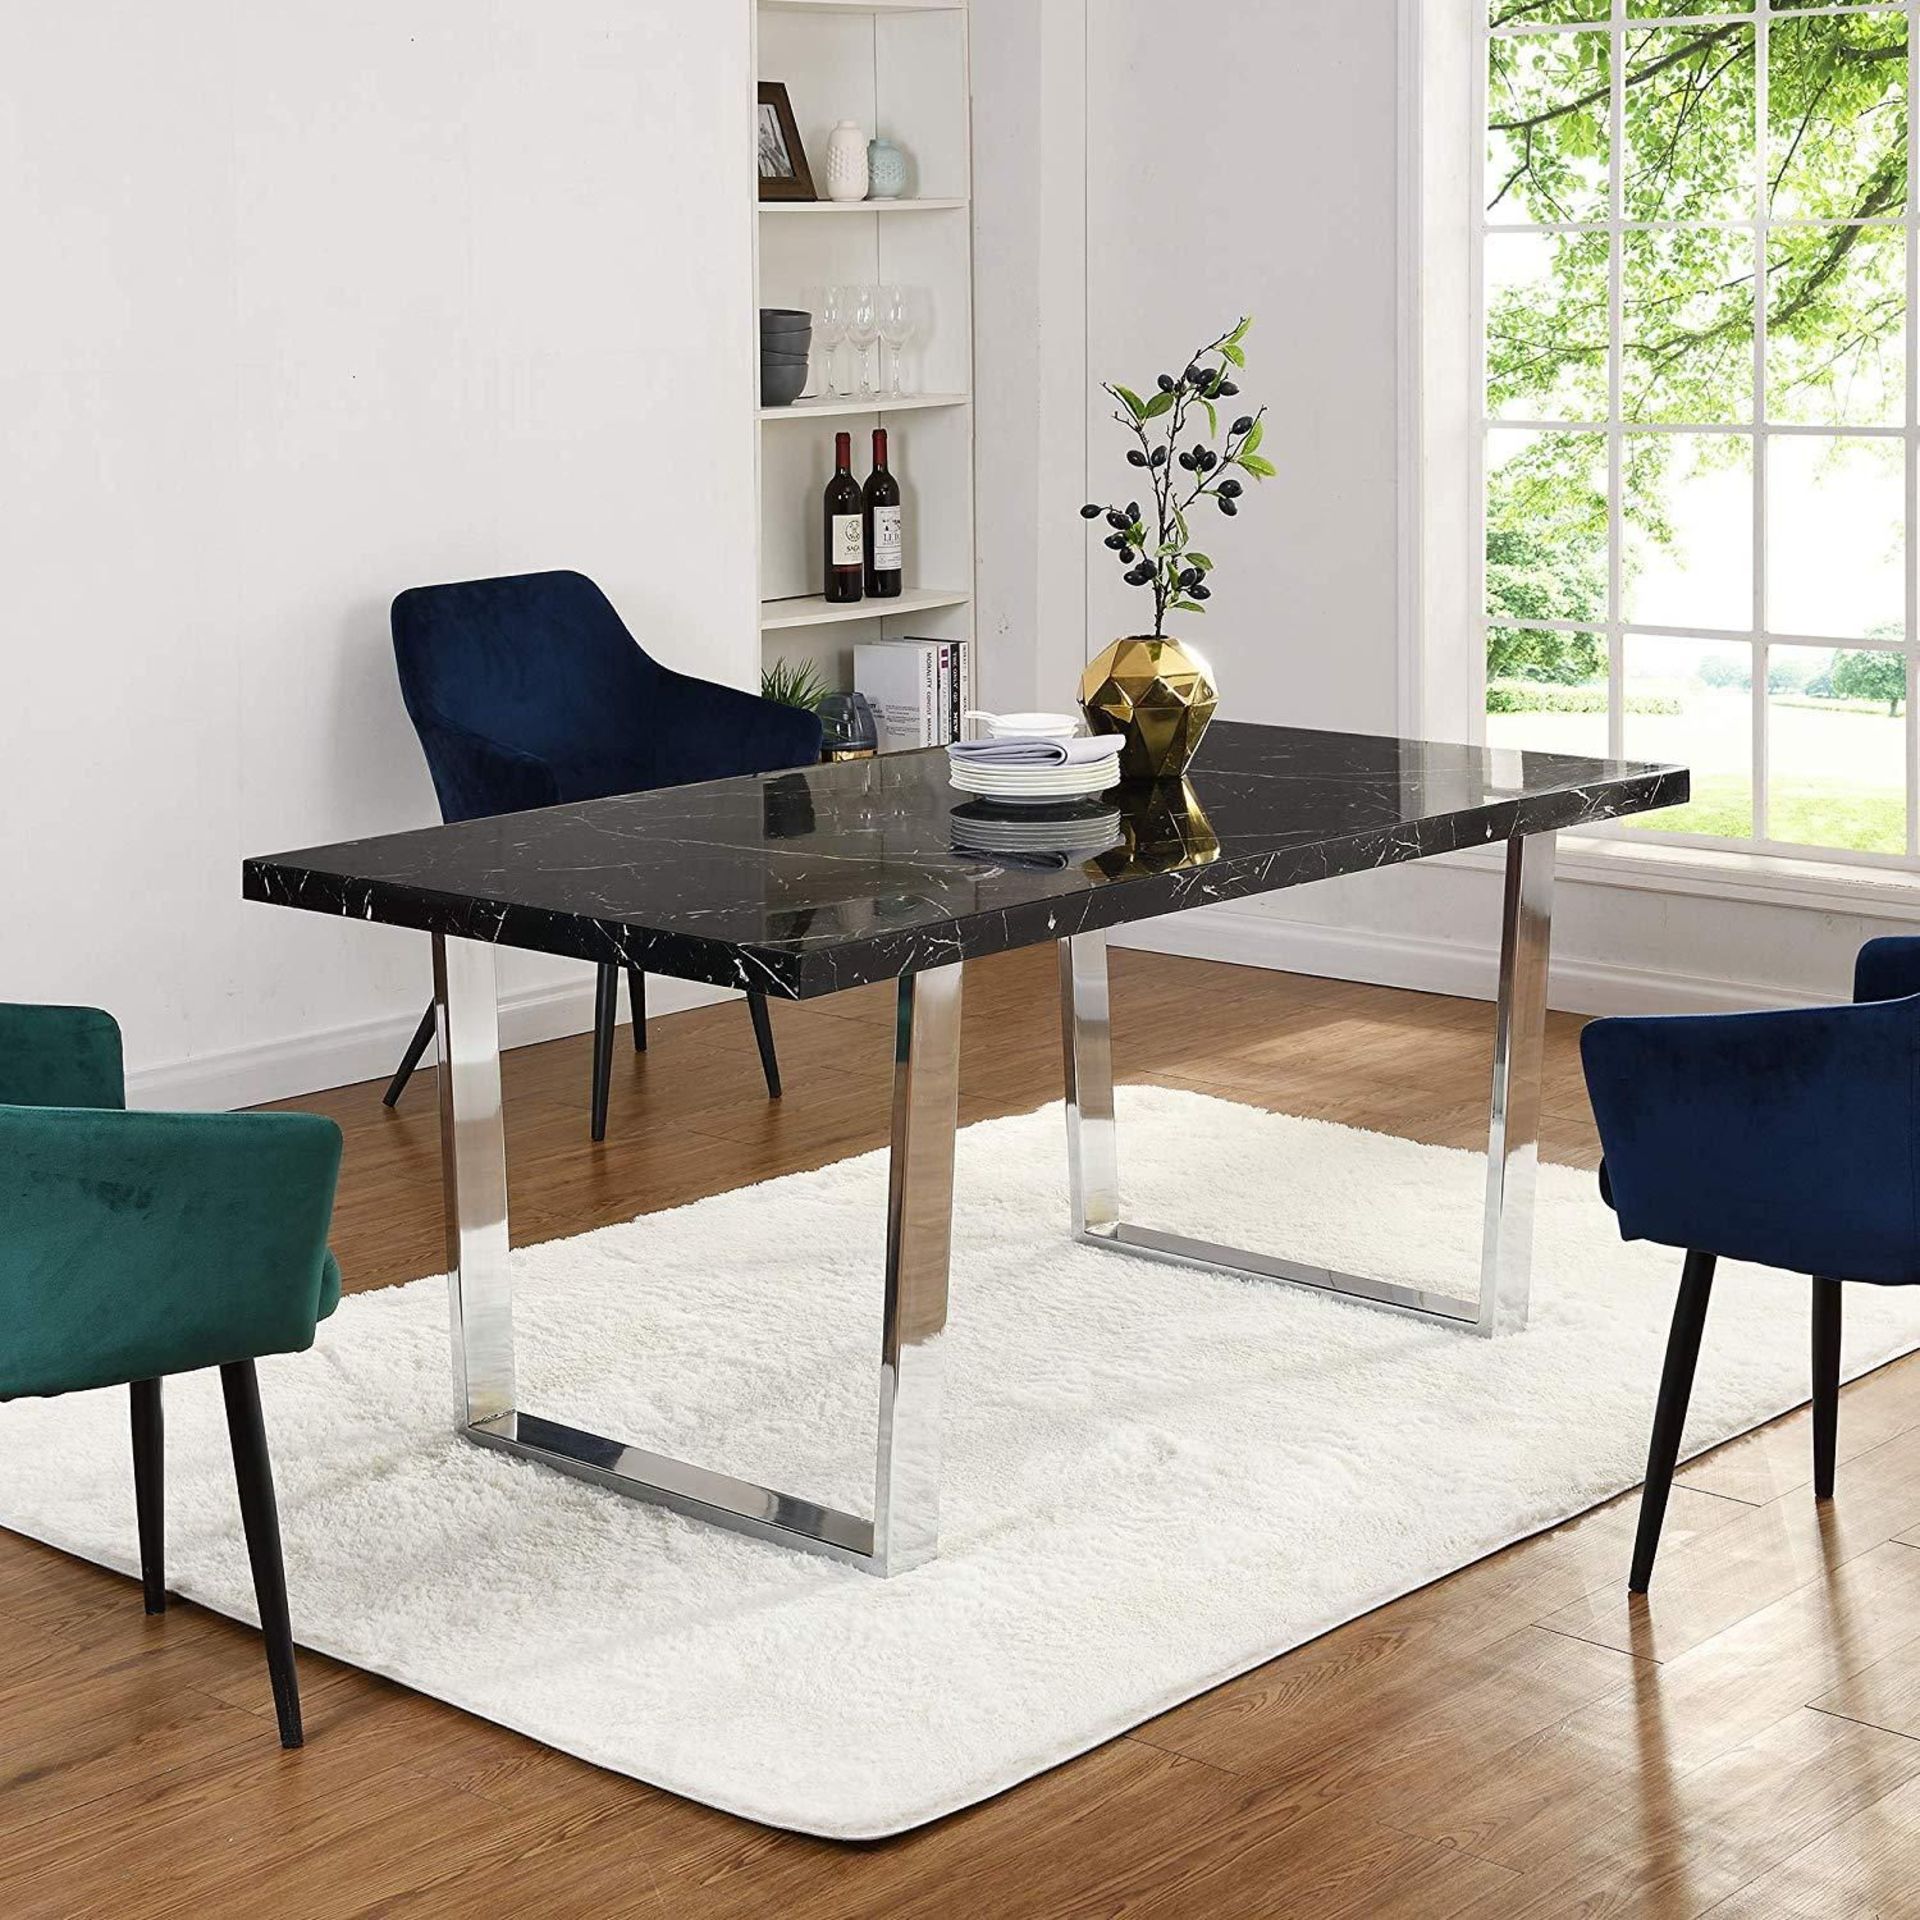 BIASCA 6-Seater High Gloss Marble Effect Dining Table with Silver Chrome Legs Black. BI. RRP £359.